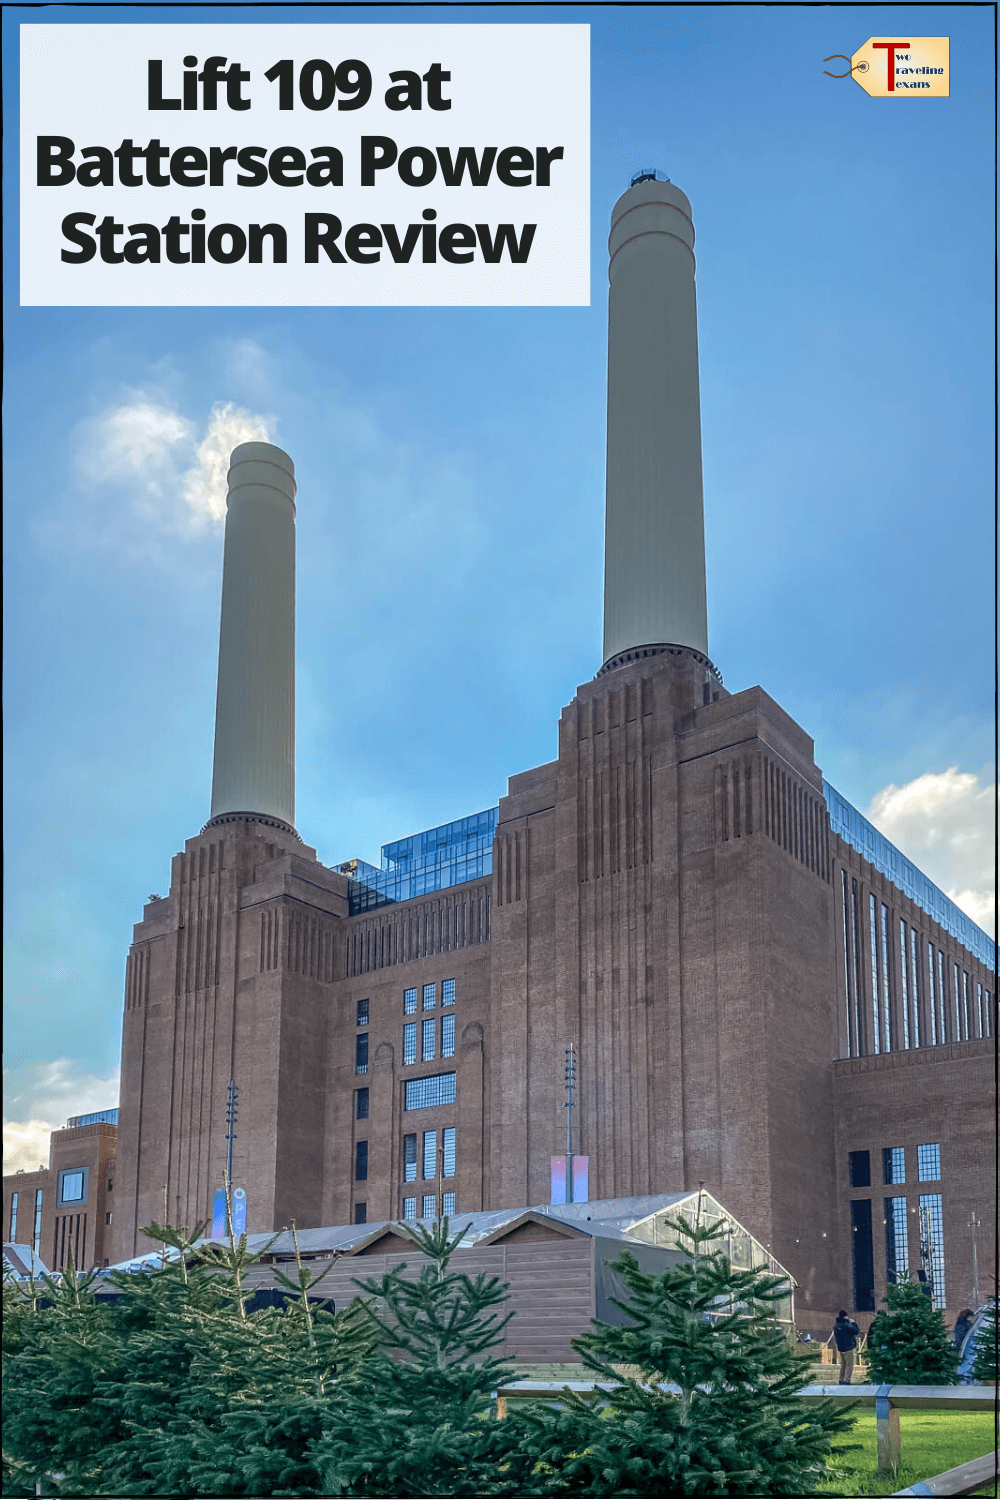 view of the battersea power station with text lift 109 at battersea power station review